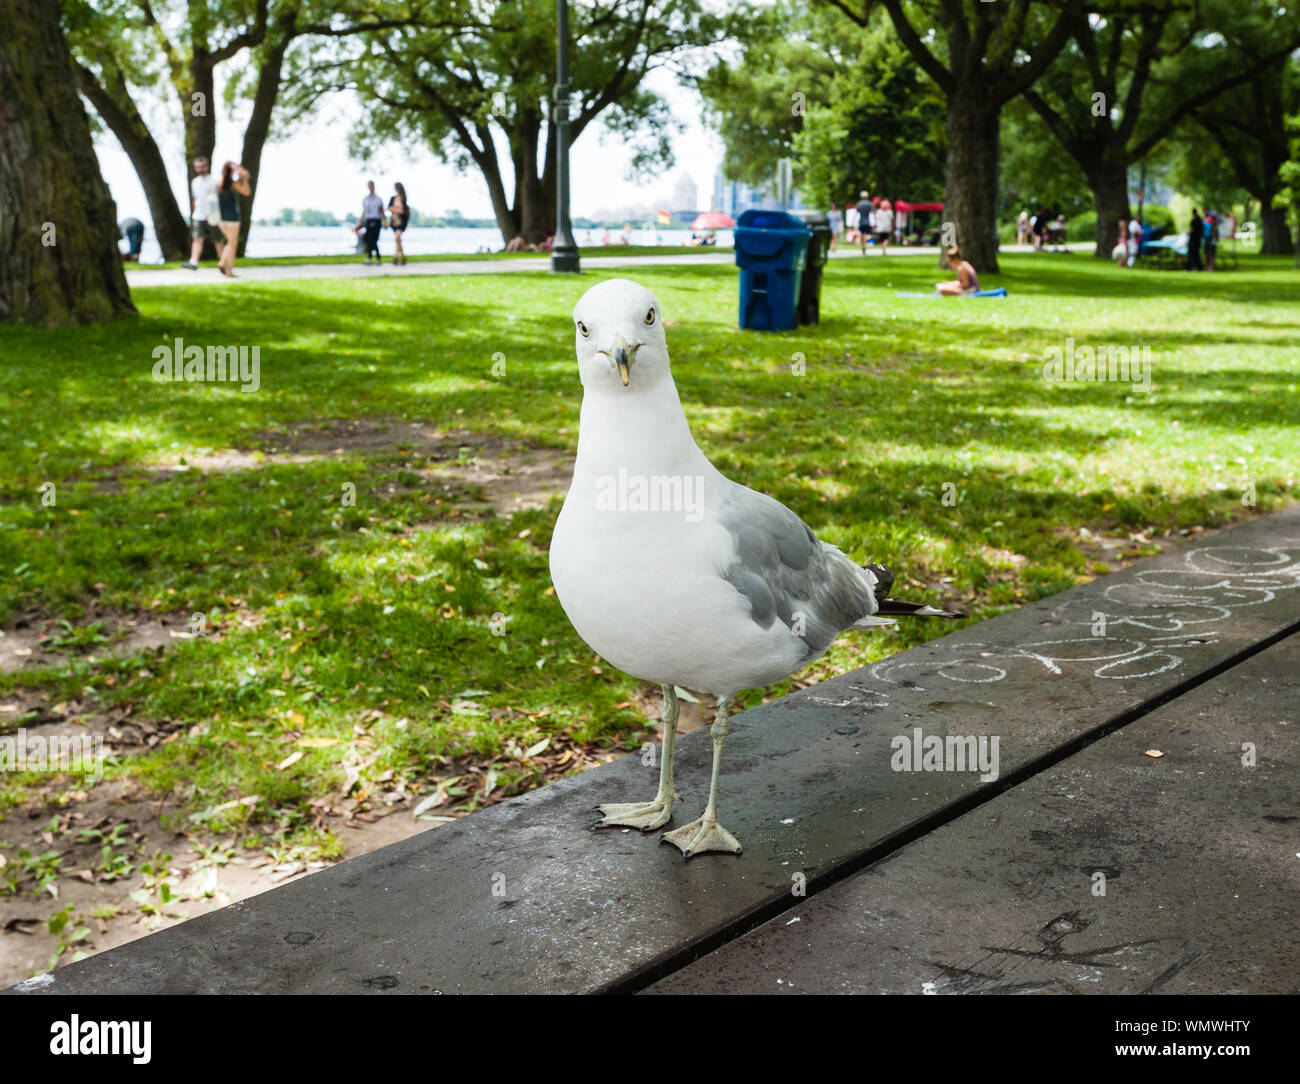 TORONTO, ONTARIO, CANADA - JULY 29, 2017: A seagull stands on a picnic table, waiting for possible food scraps, in a busy park by Lake Ontario. Stock Photo